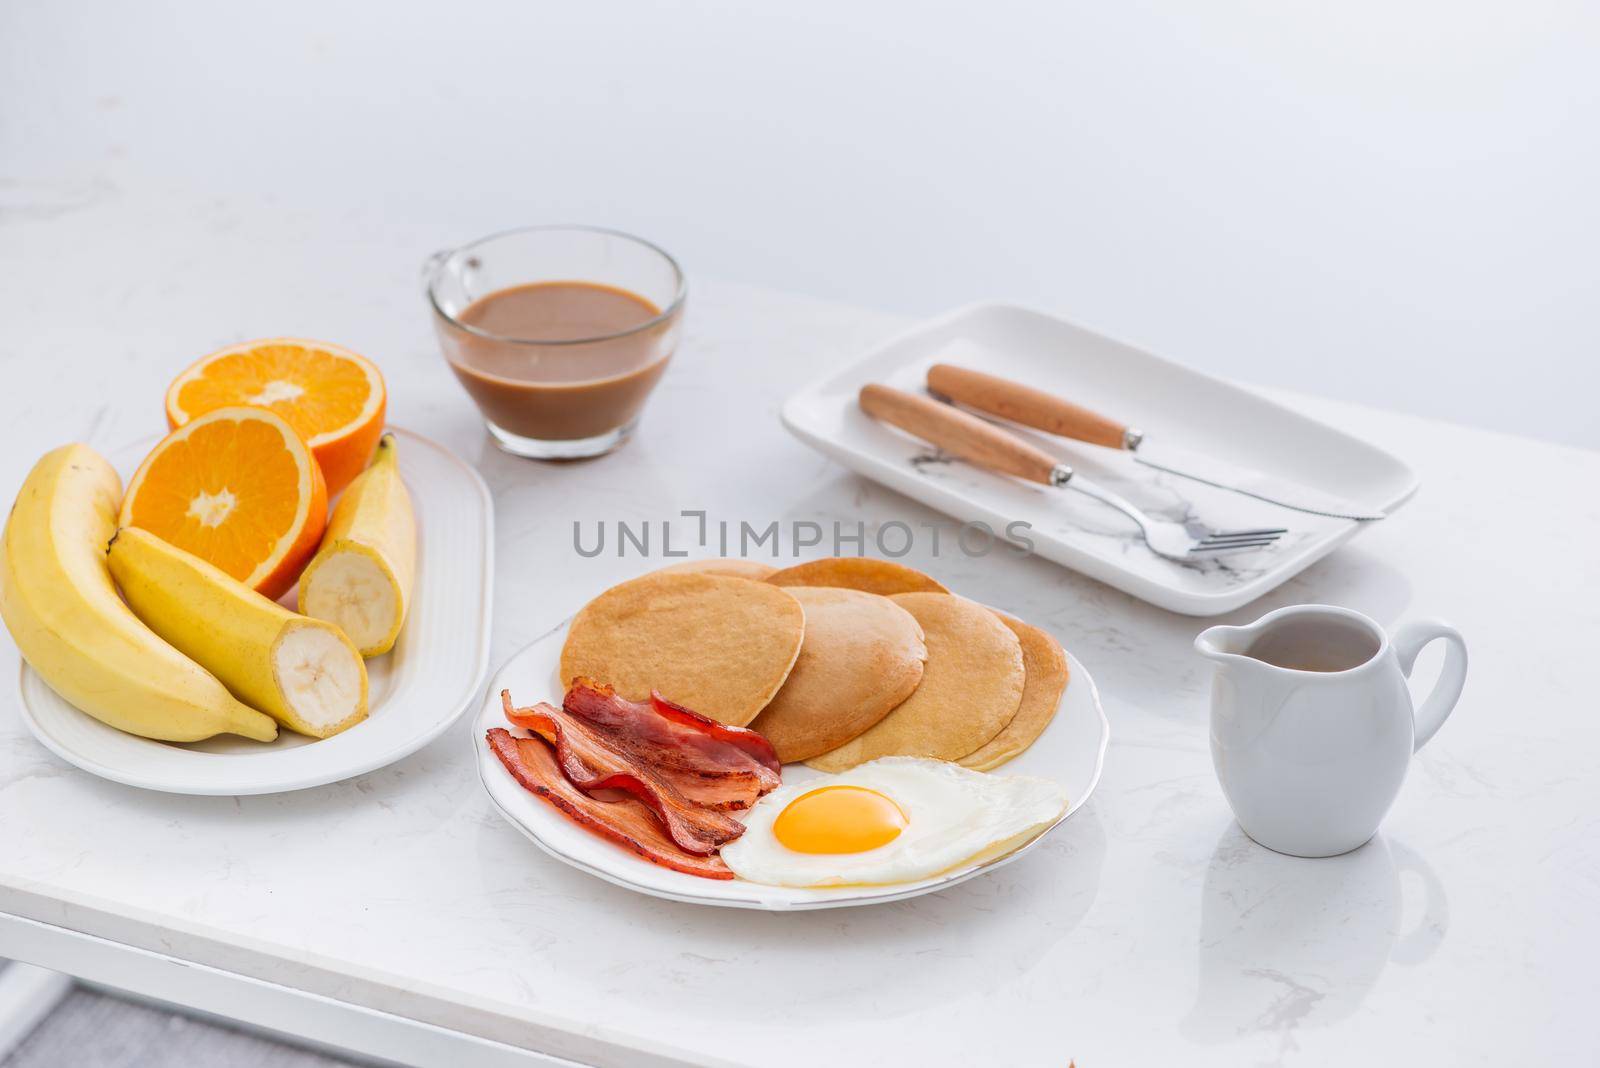 Healthy Full American Breakfast with Eggs Bacon and Pancakes